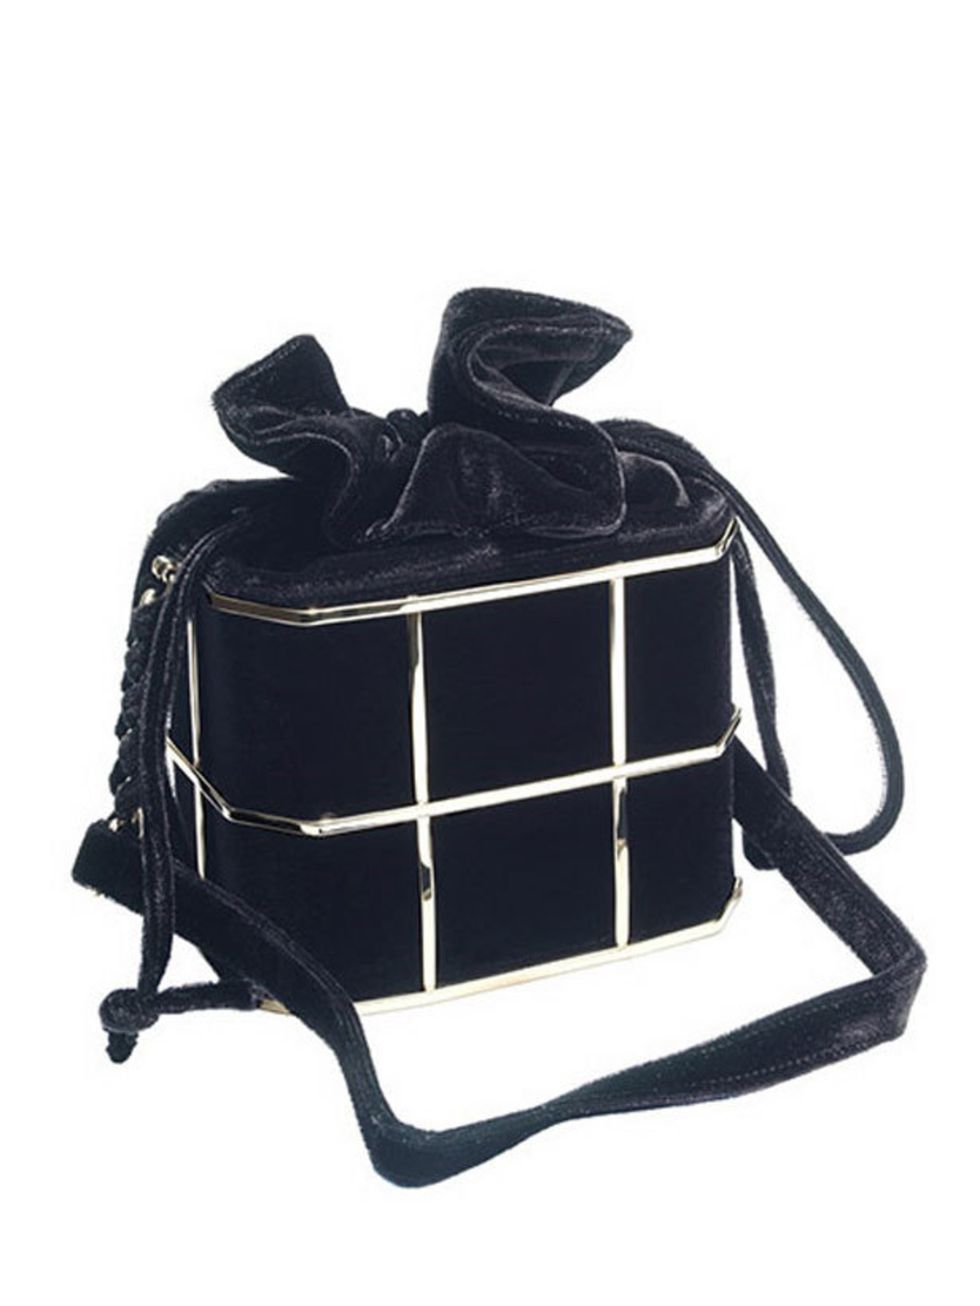 <p>Cage drawstring bag, £110, by <a href="http://www.reiss.co.uk/shop/womens/bags/pello/black/">Reiss</a></p>